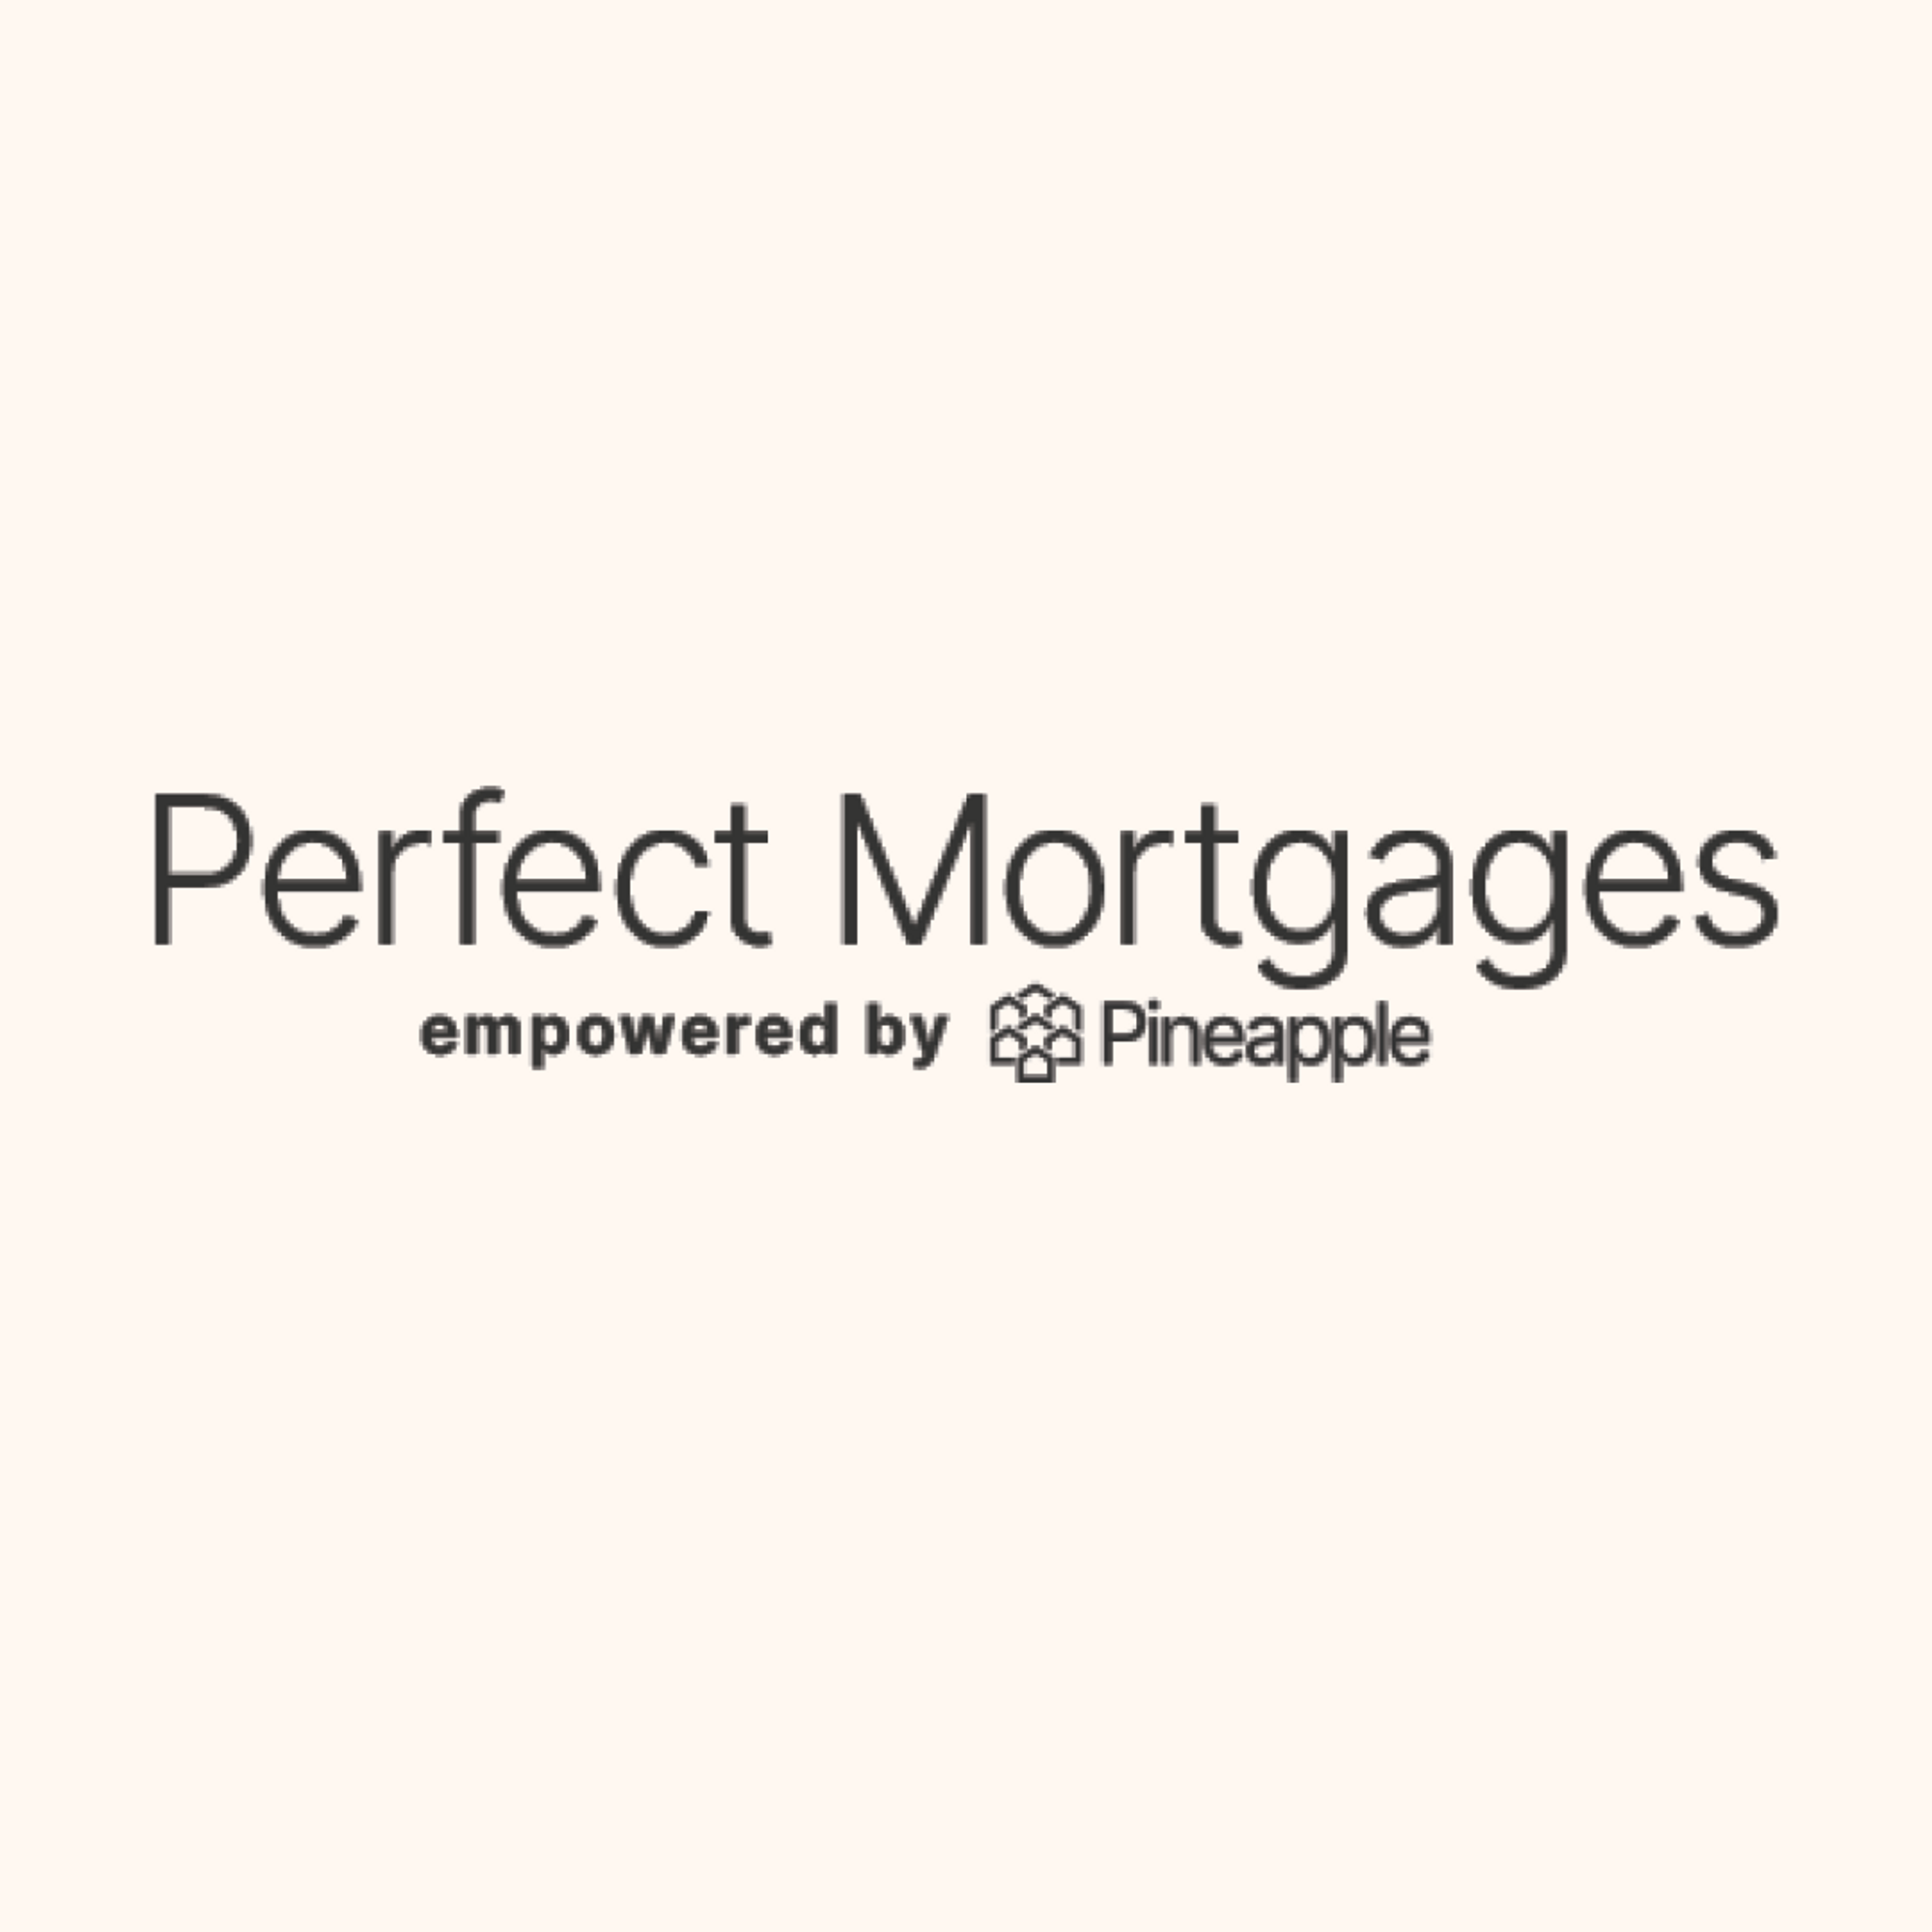 Perfect Mortgages